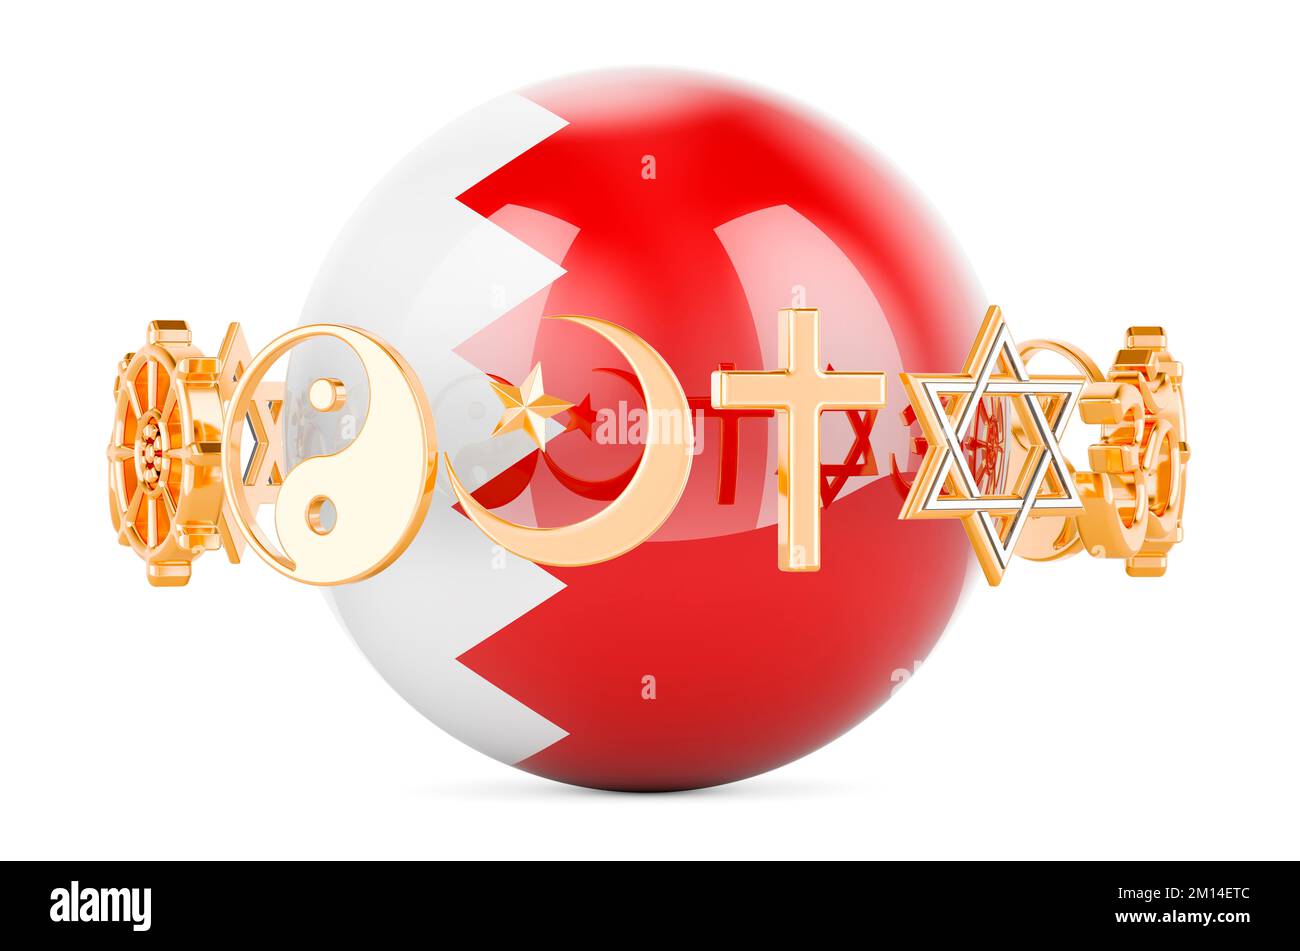 Bahraini flag painted on sphere with religions symbols around, 3D rendering isolated on white background Stock Photo